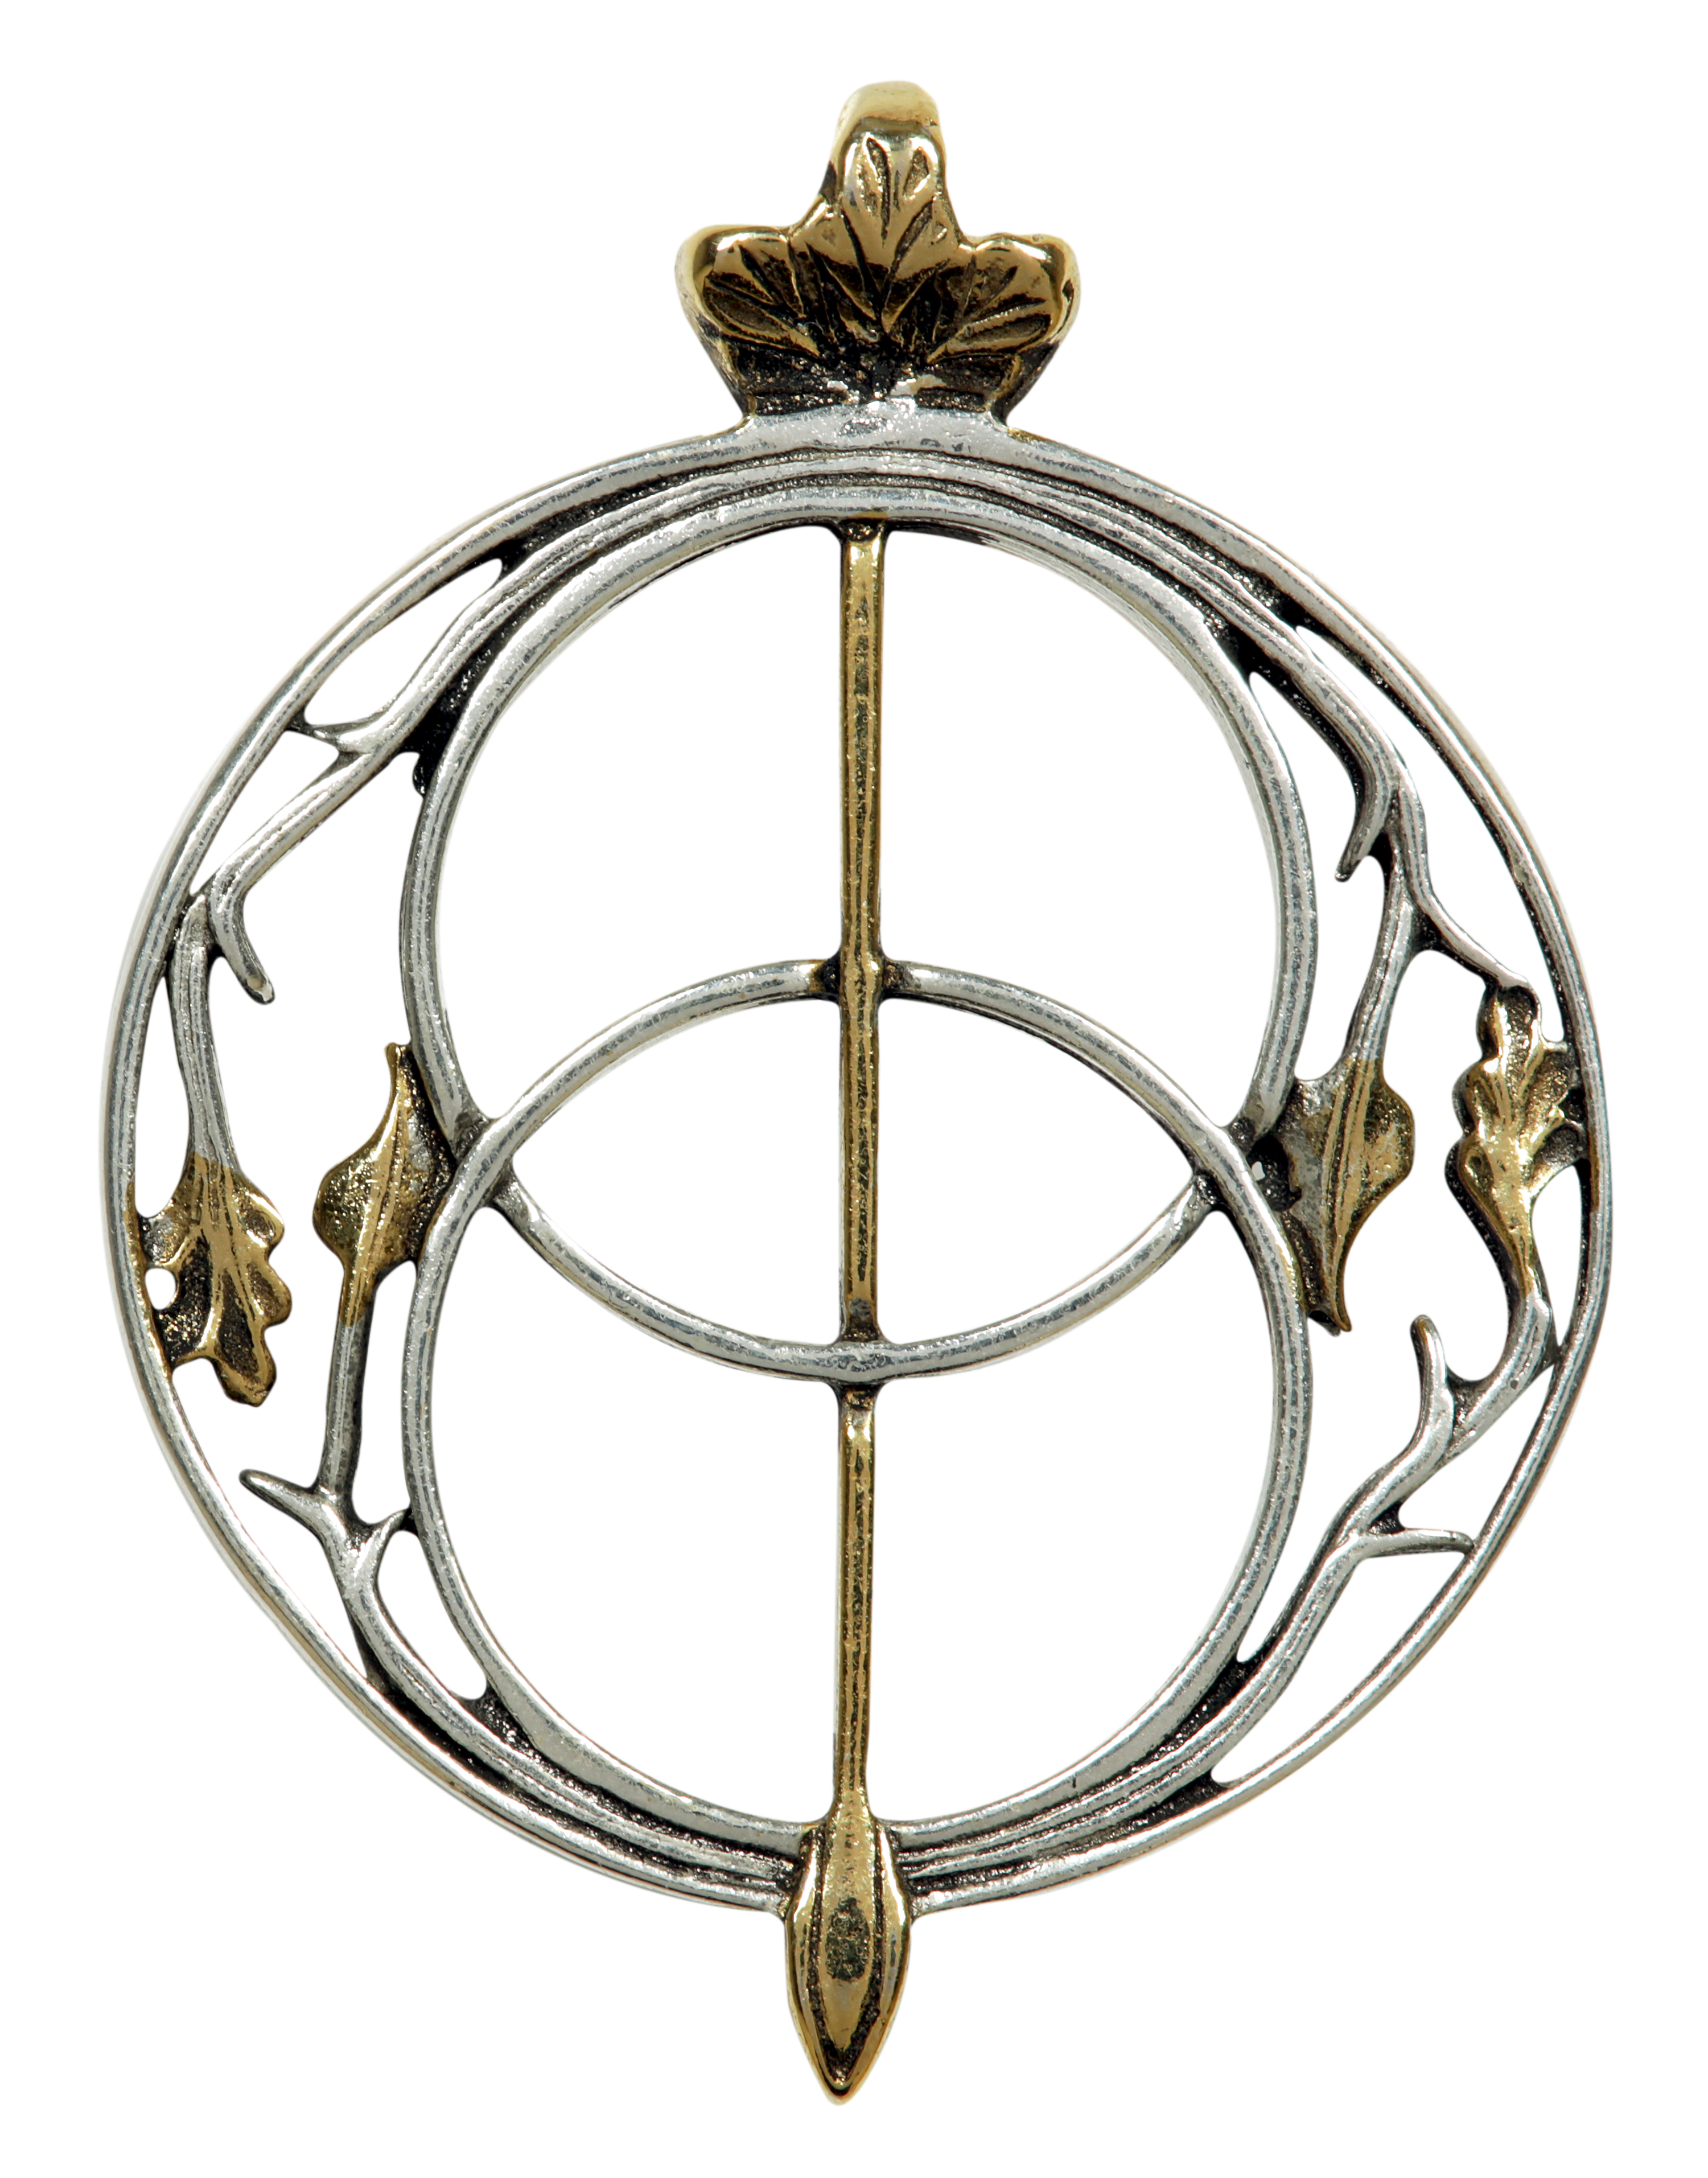 Chalice Well for Connecting with the Divine